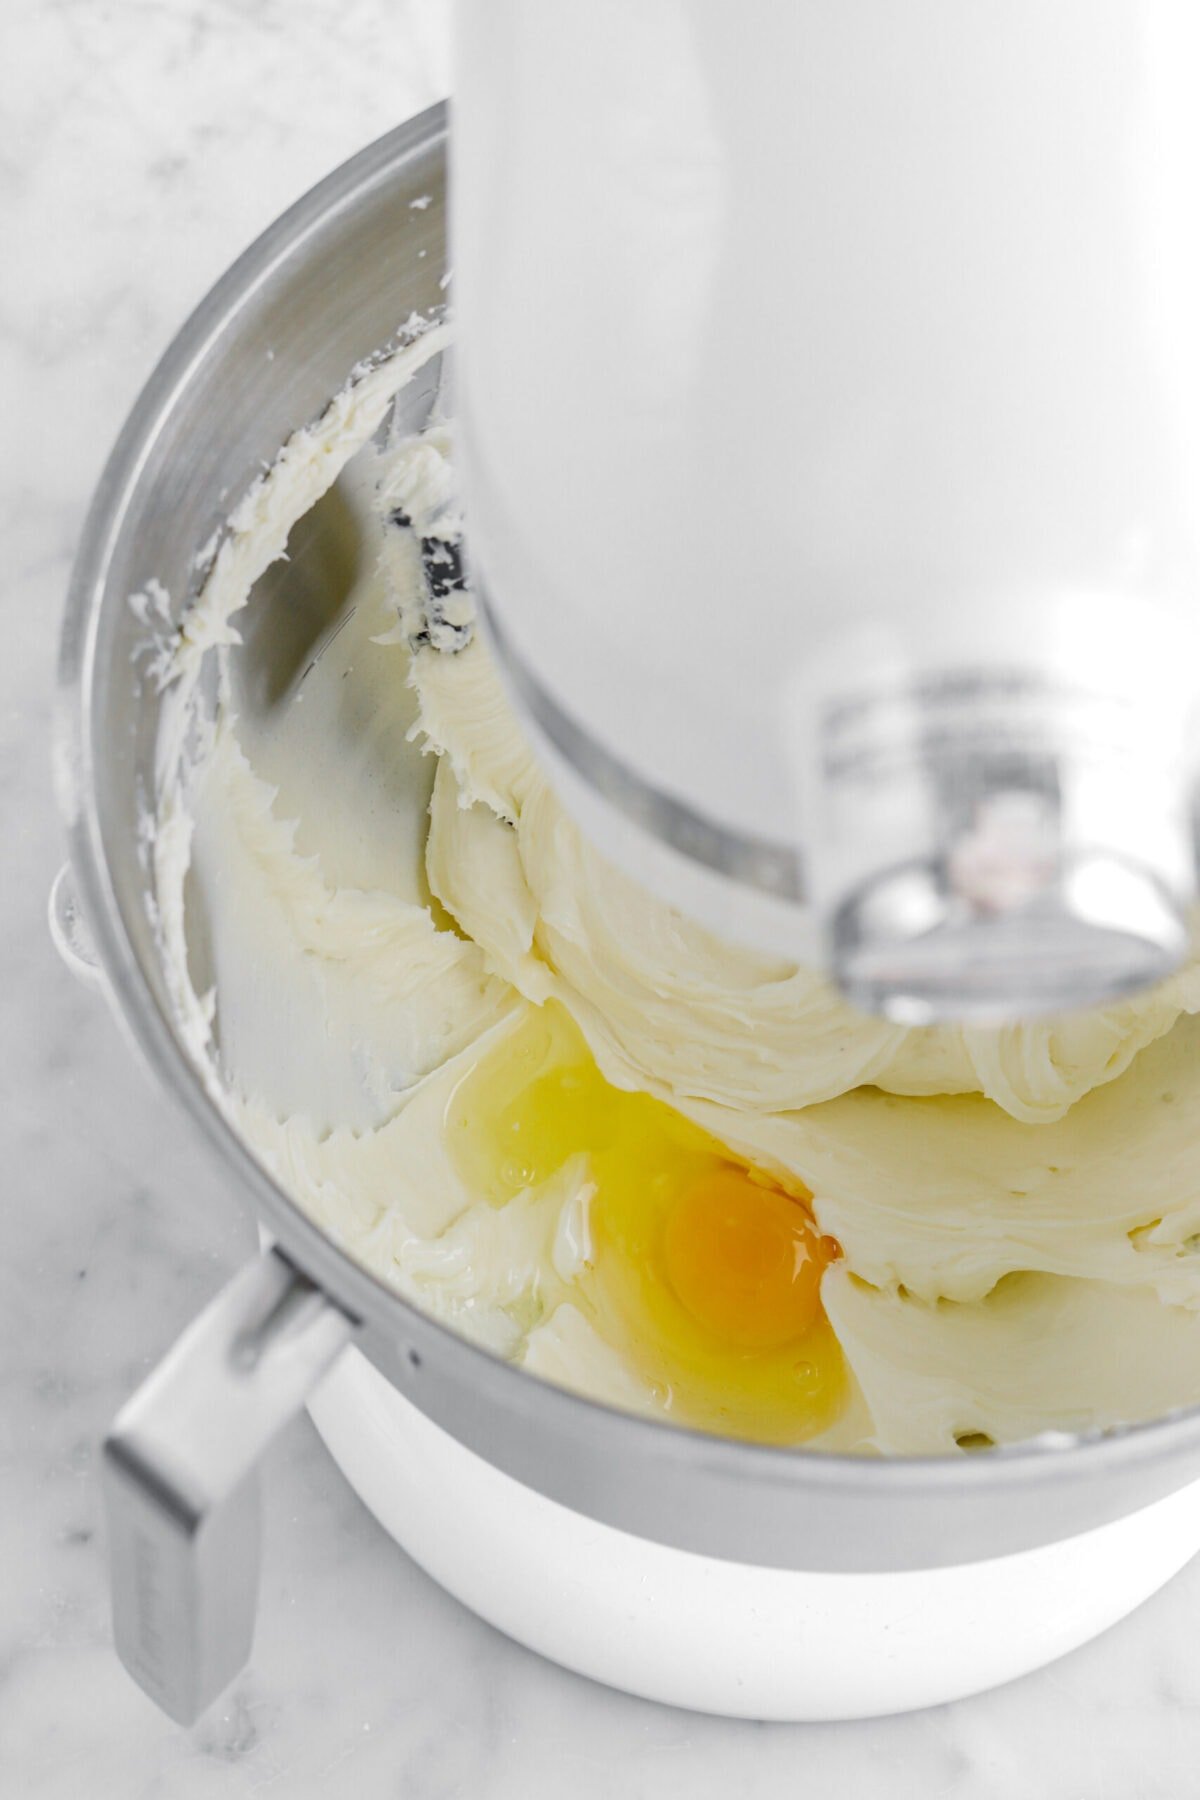 egg added to cream cheese mixture.